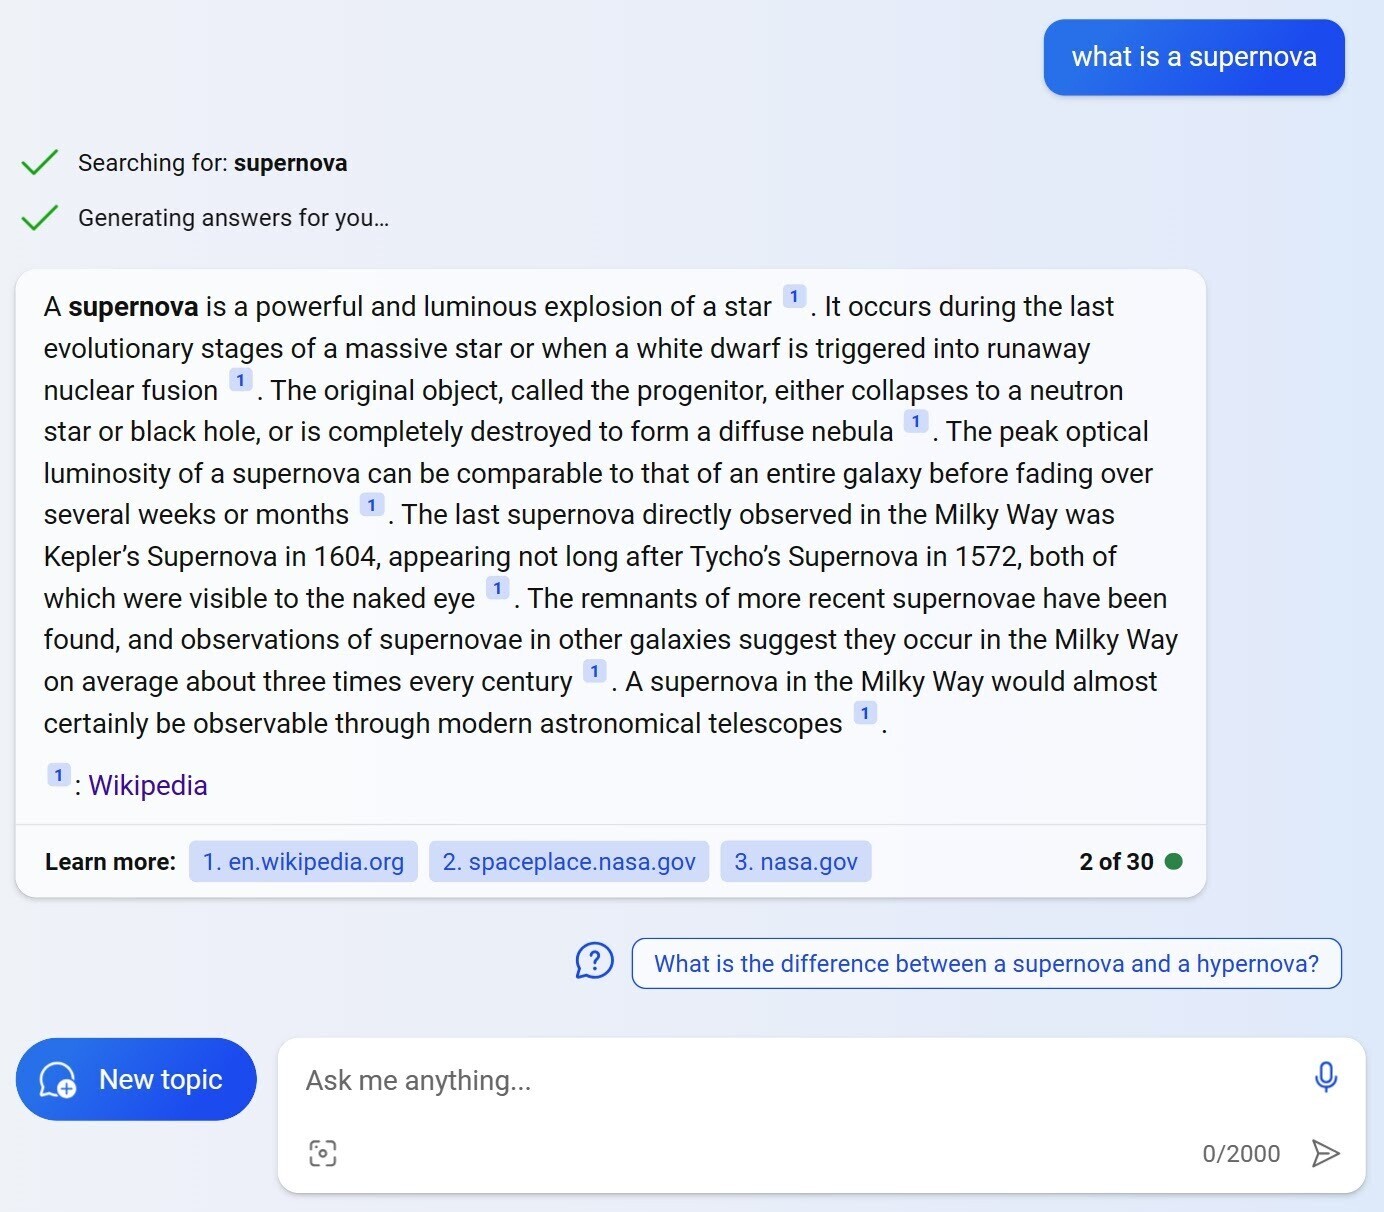 Bing Chat response for "what is a supernova" search query